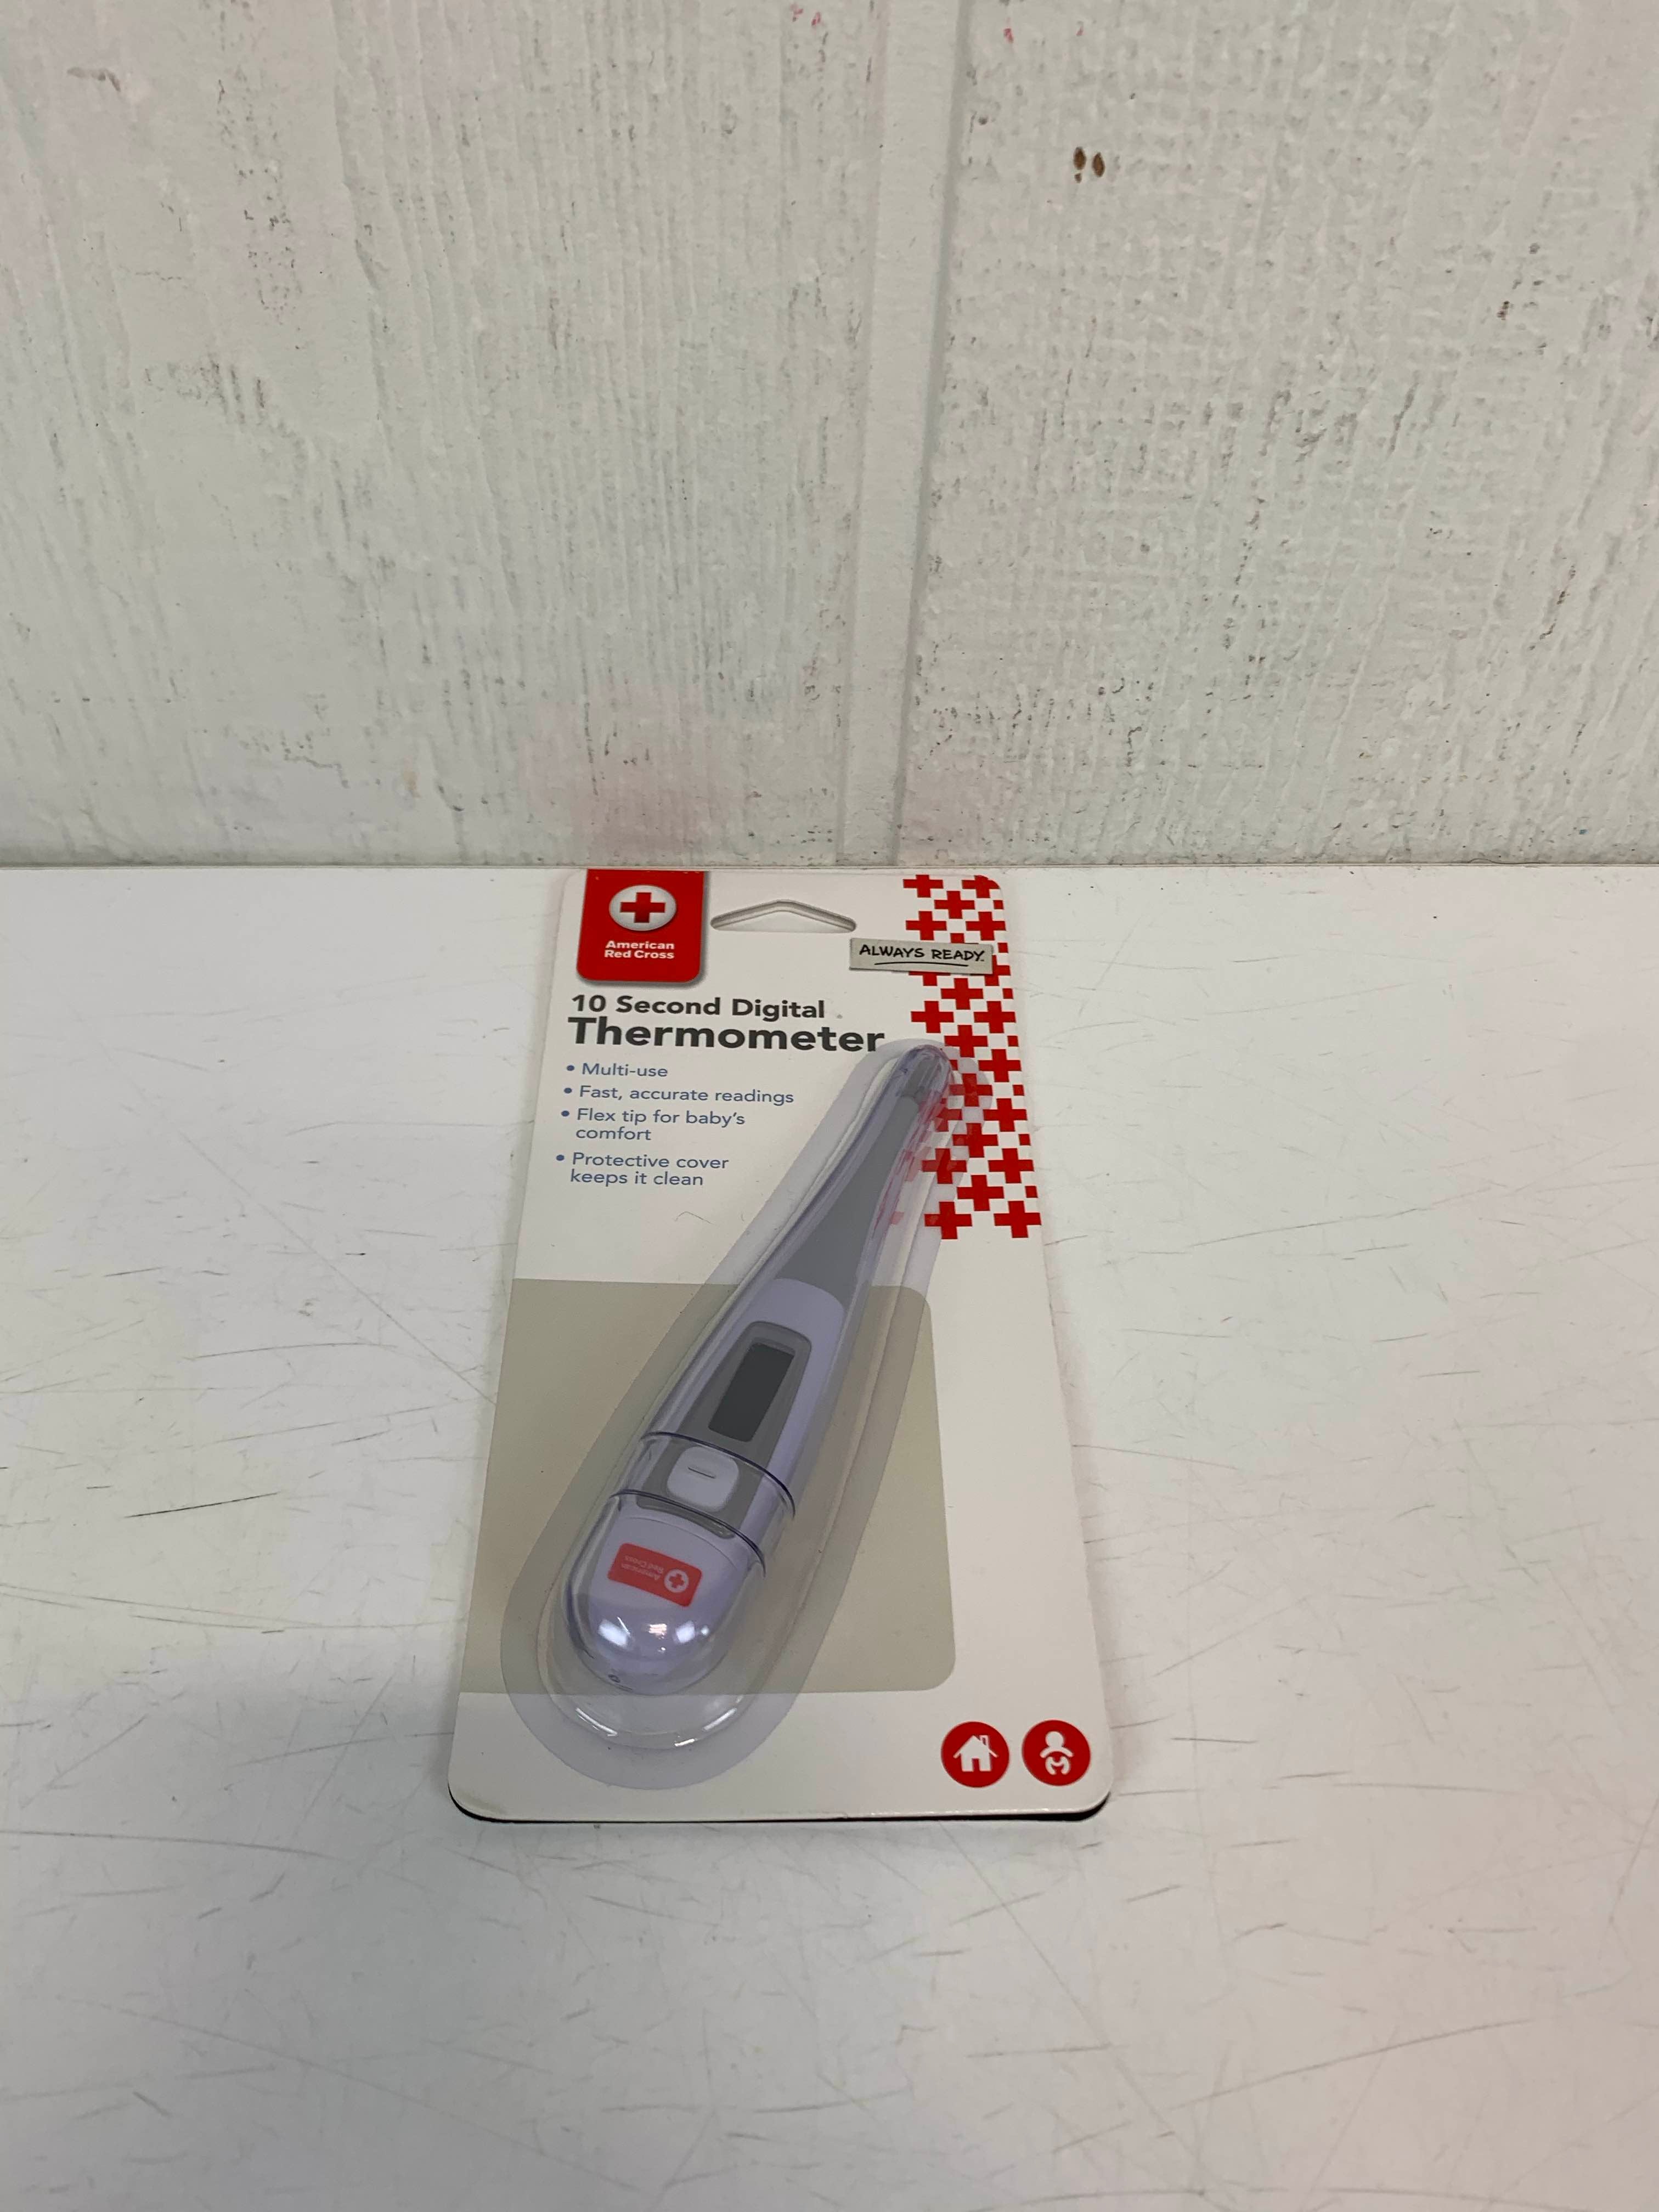 American Red Cross 10 Second Digital Thermometer 